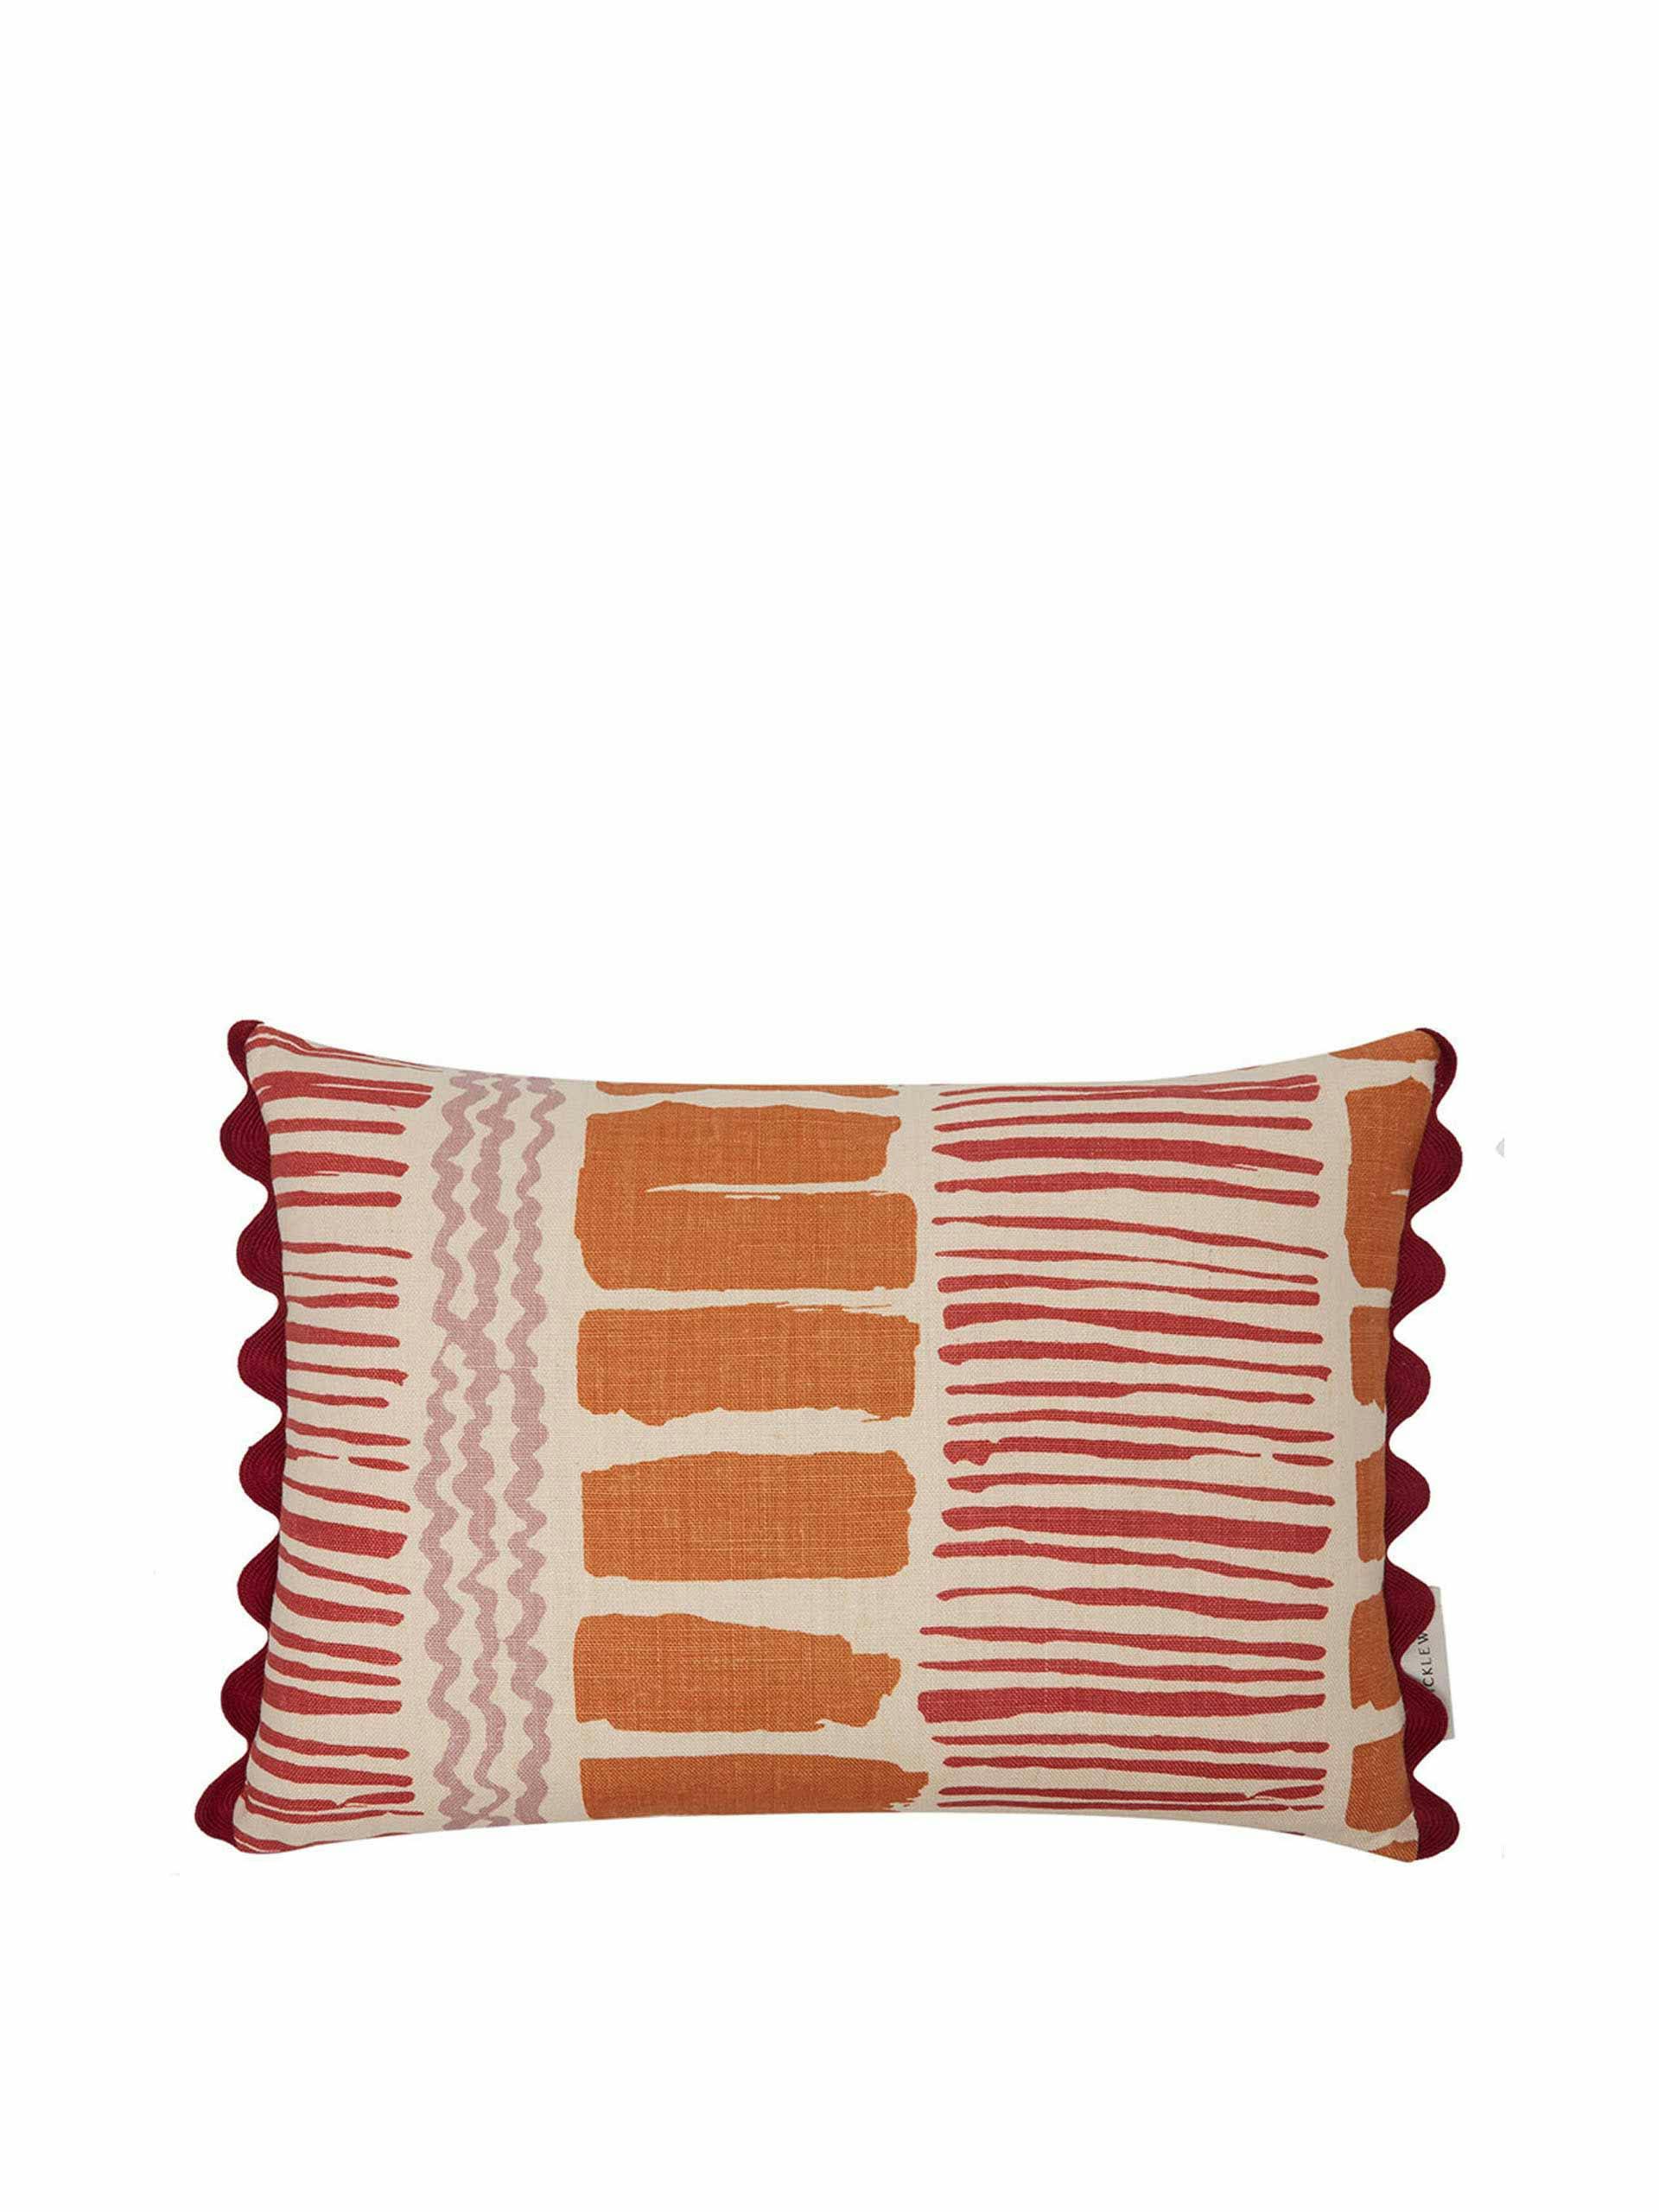 Saltaire orange red oblong cushion